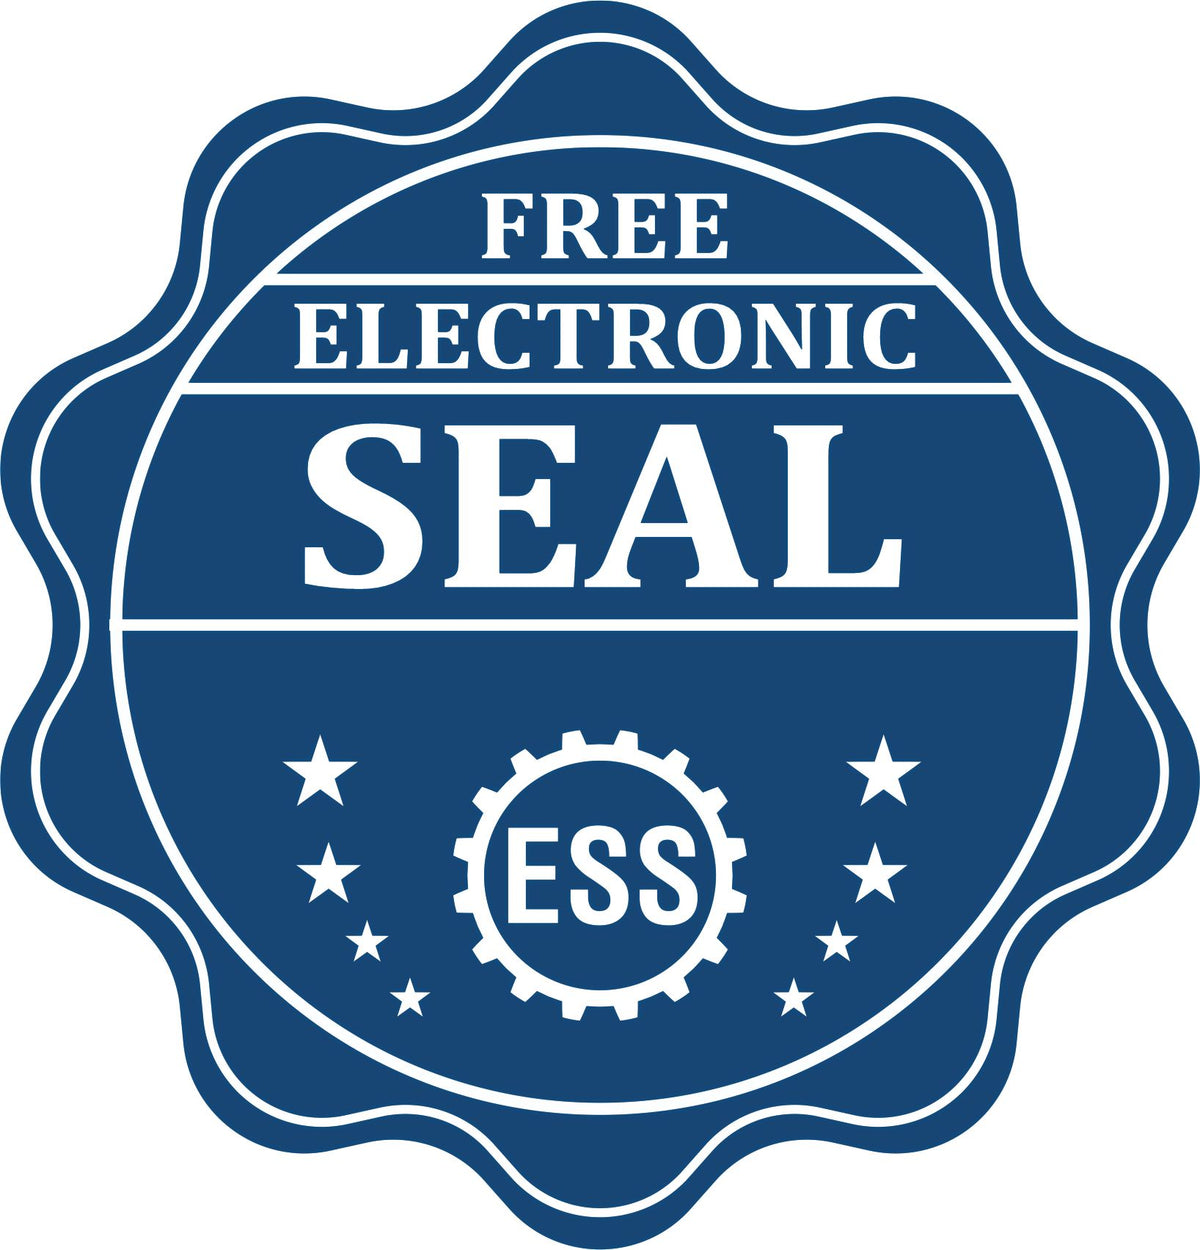 A badge showing a free electronic seal for the Super Slim Oregon Notary Public Stamp with stars and the ESS gear on the emblem.